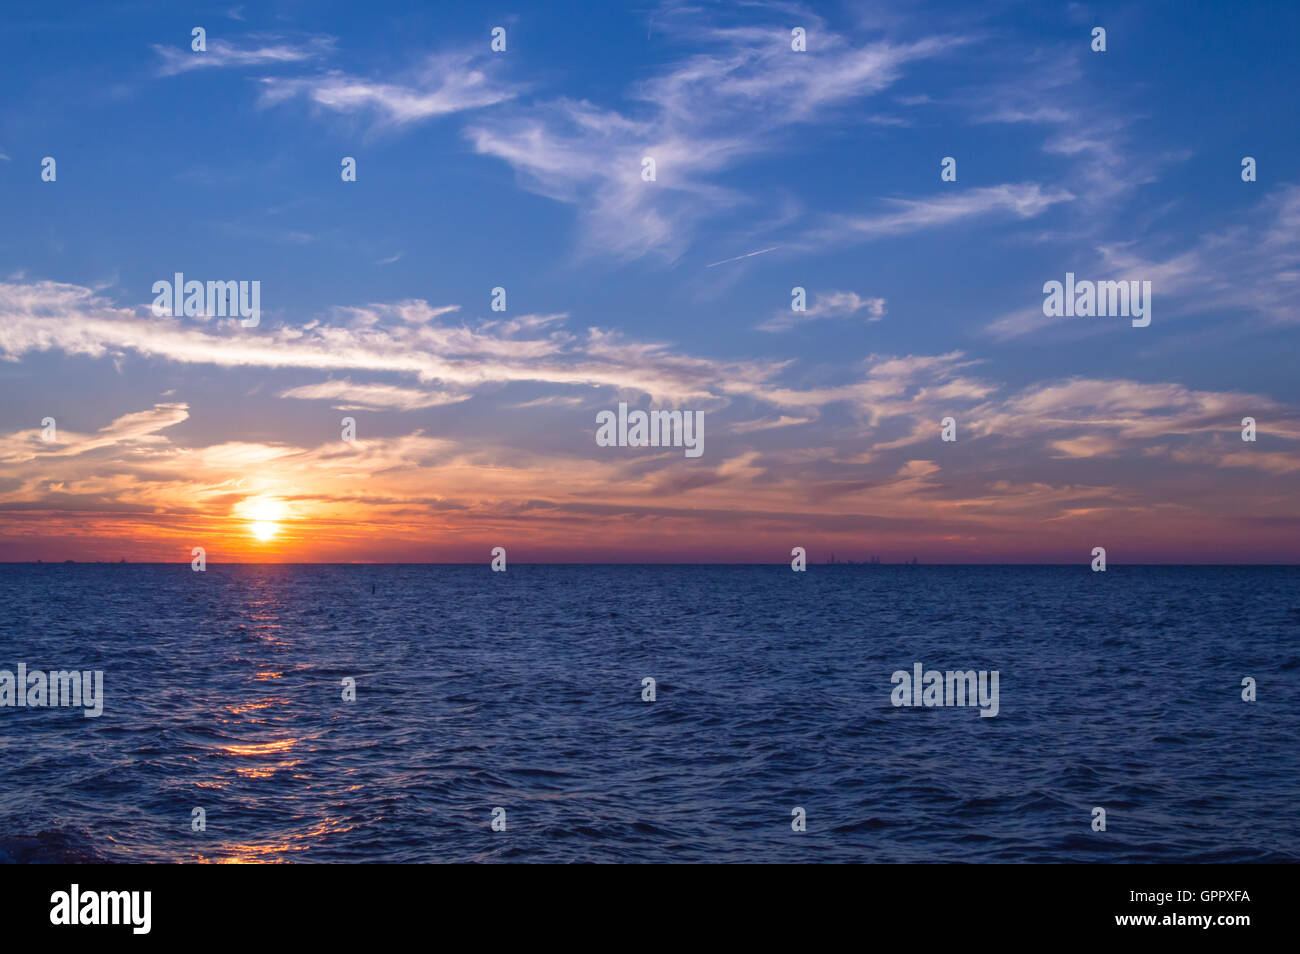 Sunset over Lake Michigan. Chicago Skyline can be seen on the horizon. Shot  at Indiana Dunes National Lakeshore Stock Photo - Alamy